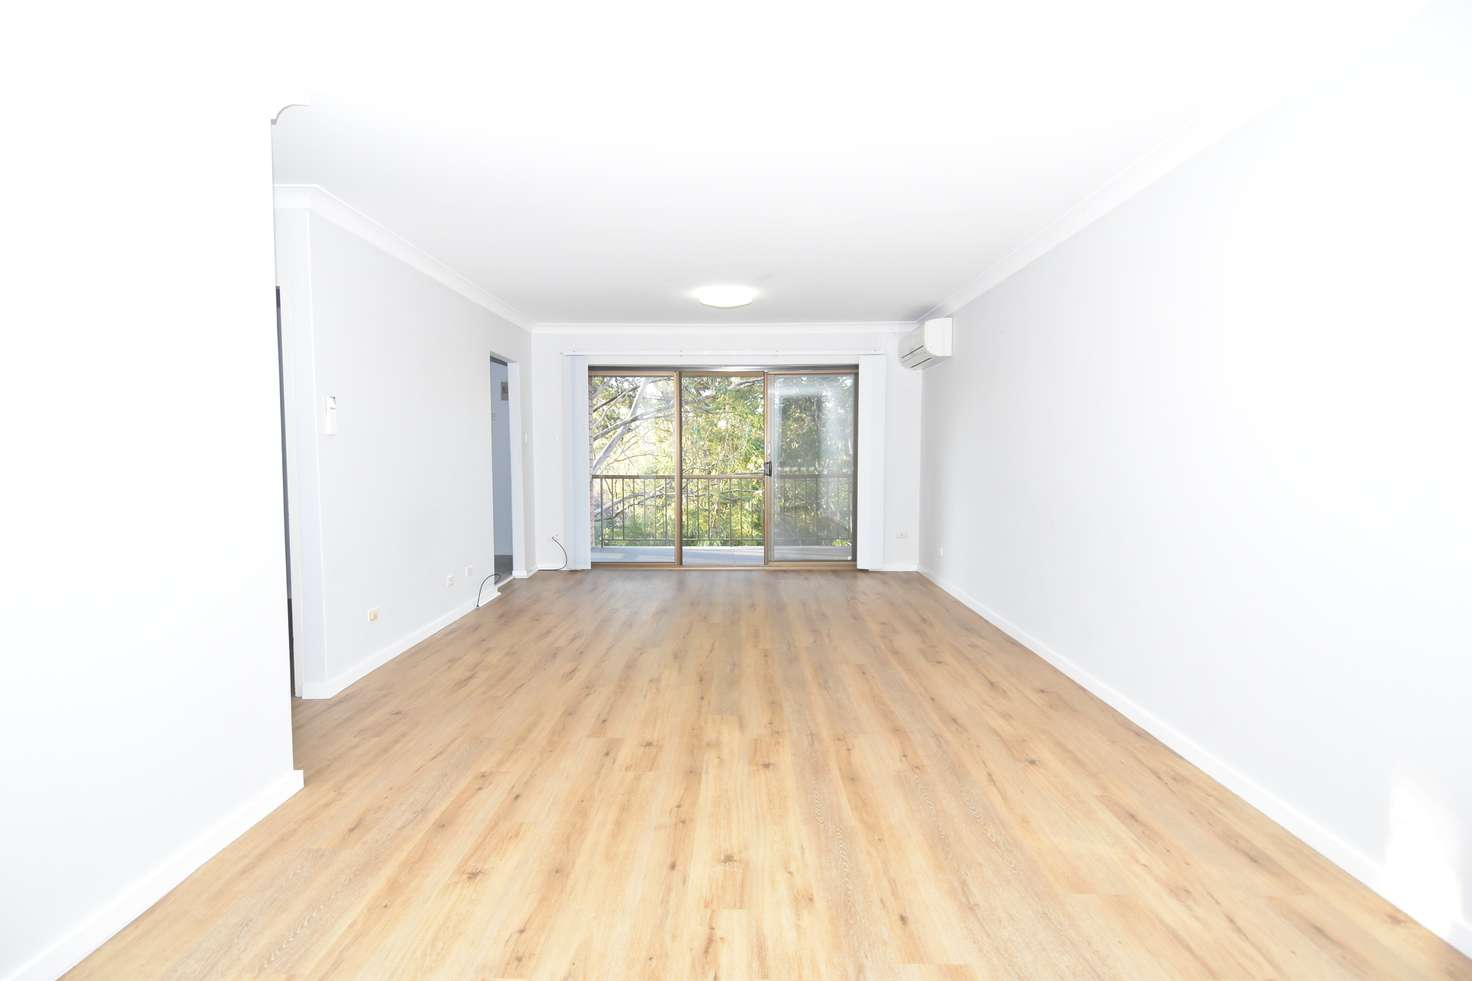 Main view of Homely unit listing, 21/28-32 Railway Crescent, Jannali NSW 2226